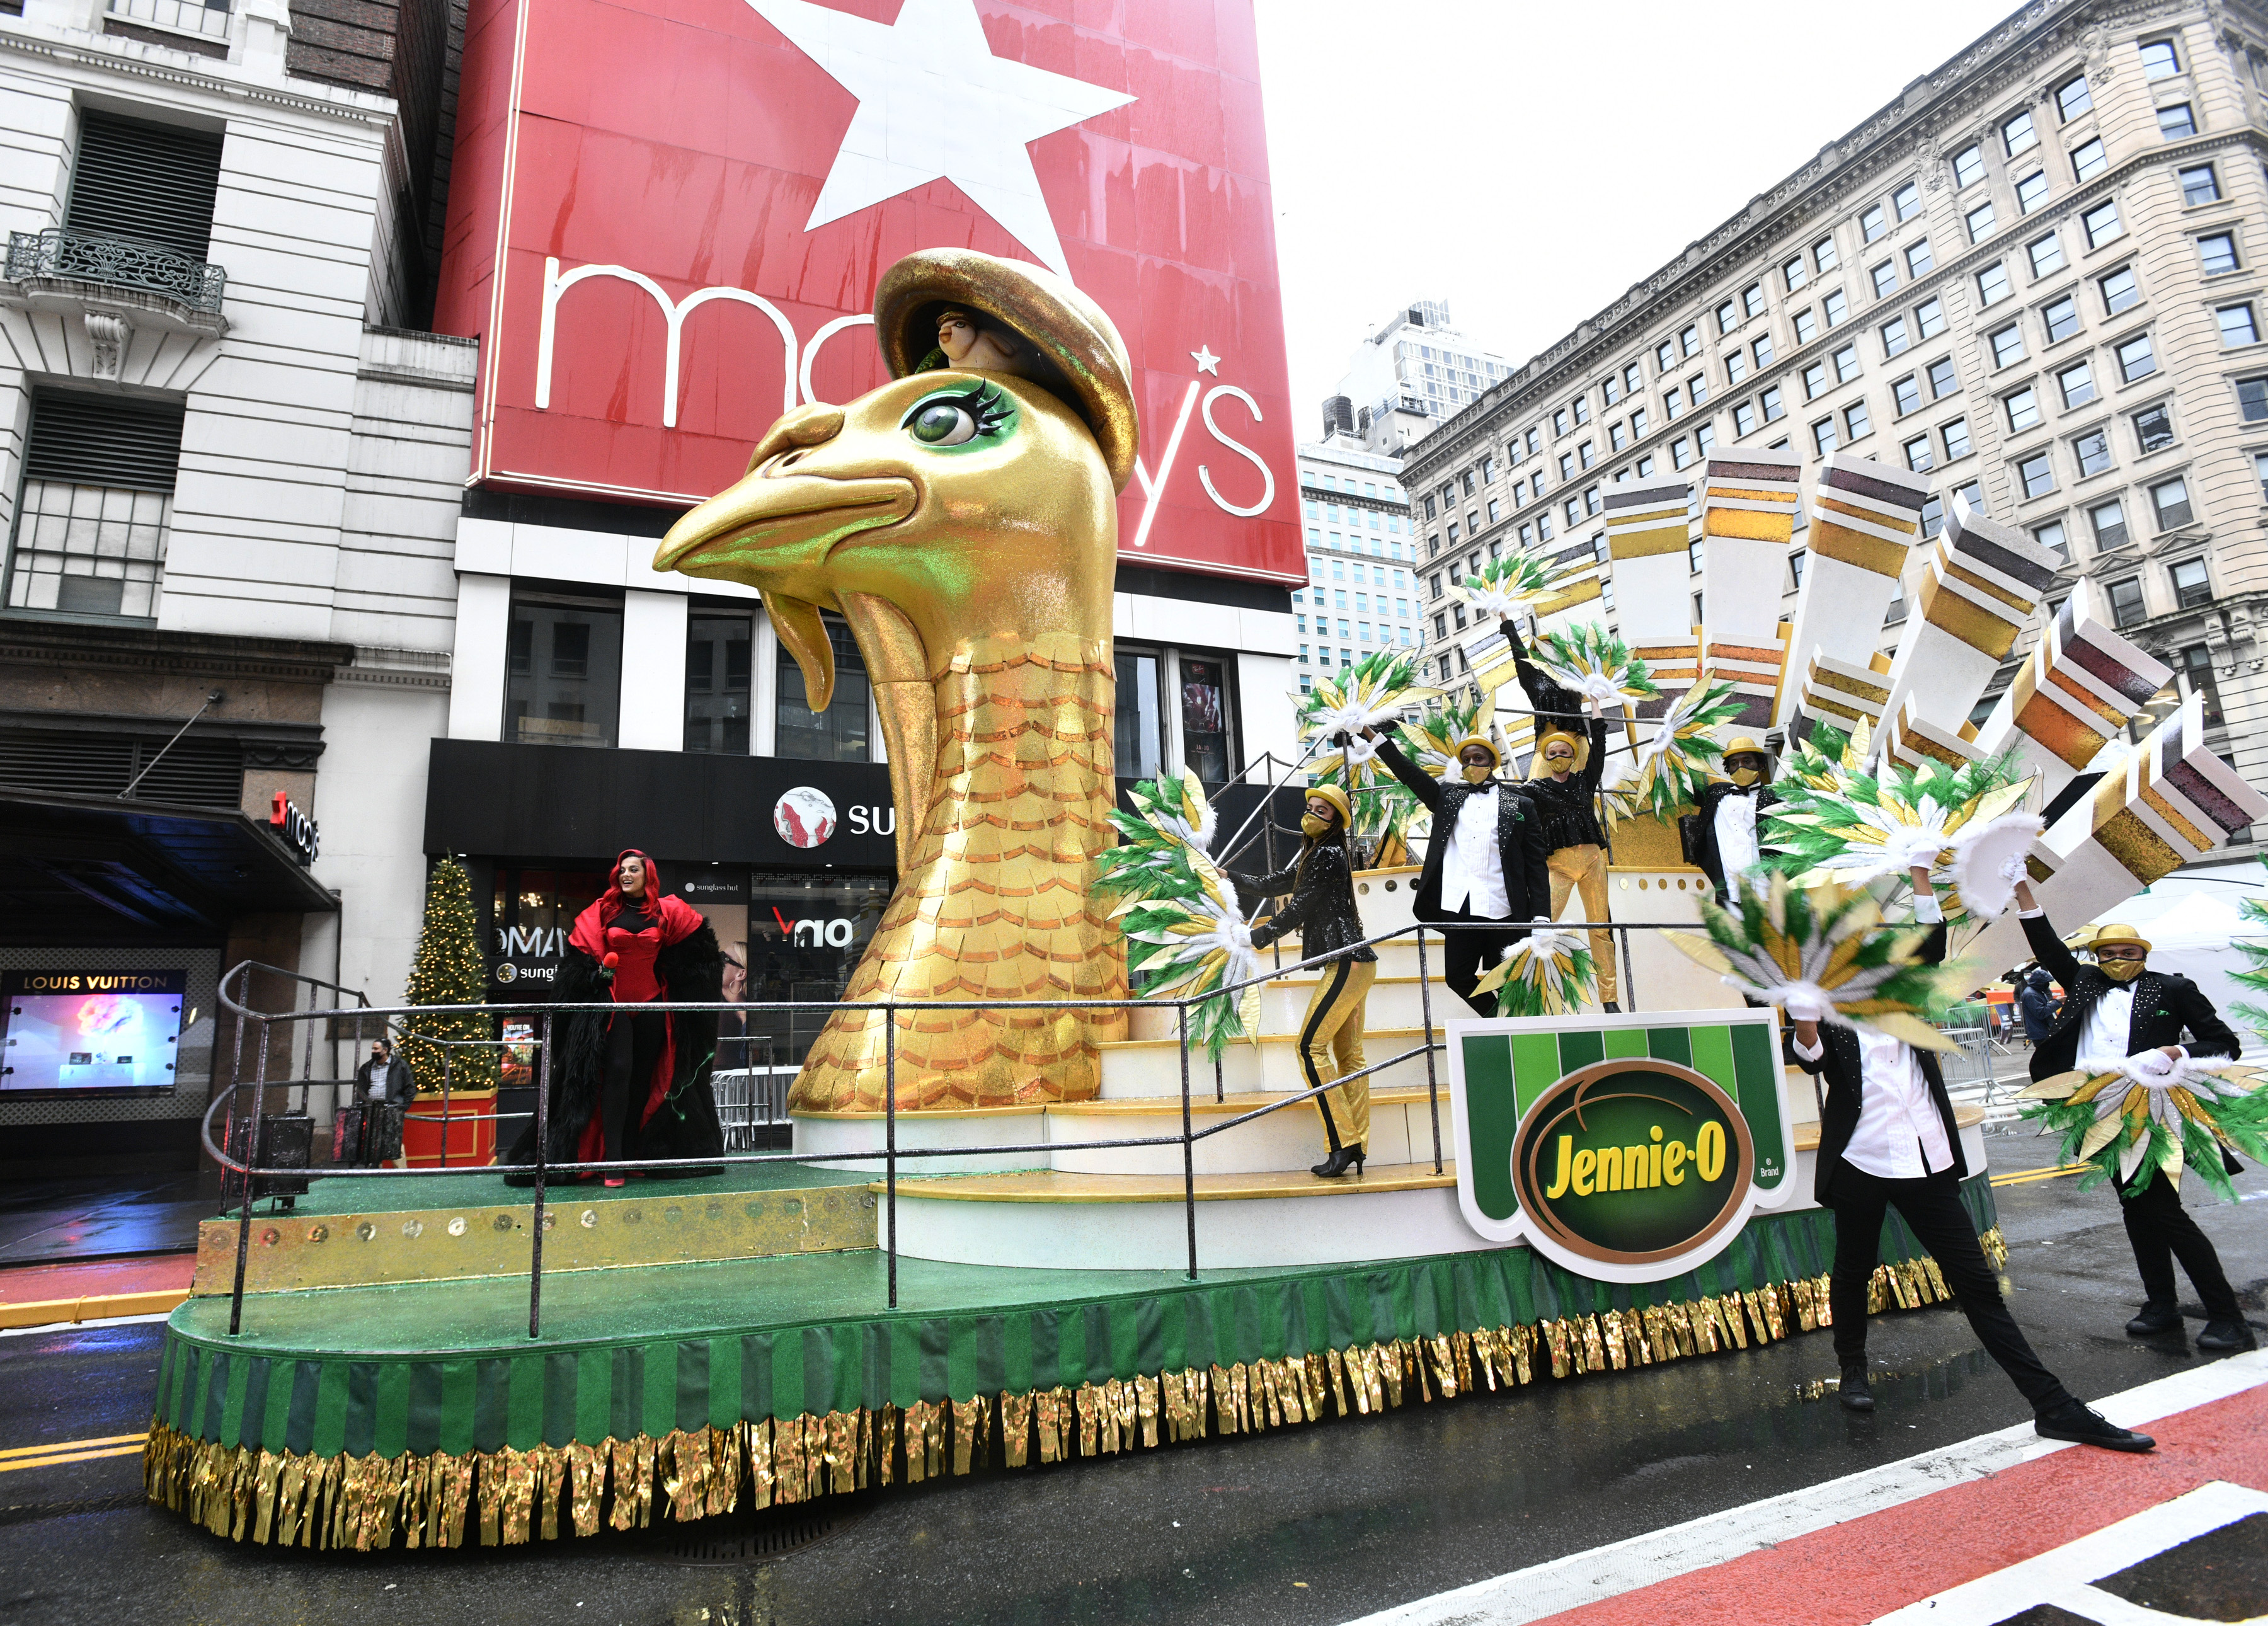 How To Watch Macy's Thanksgiving Parade Live on TV and via Livestream